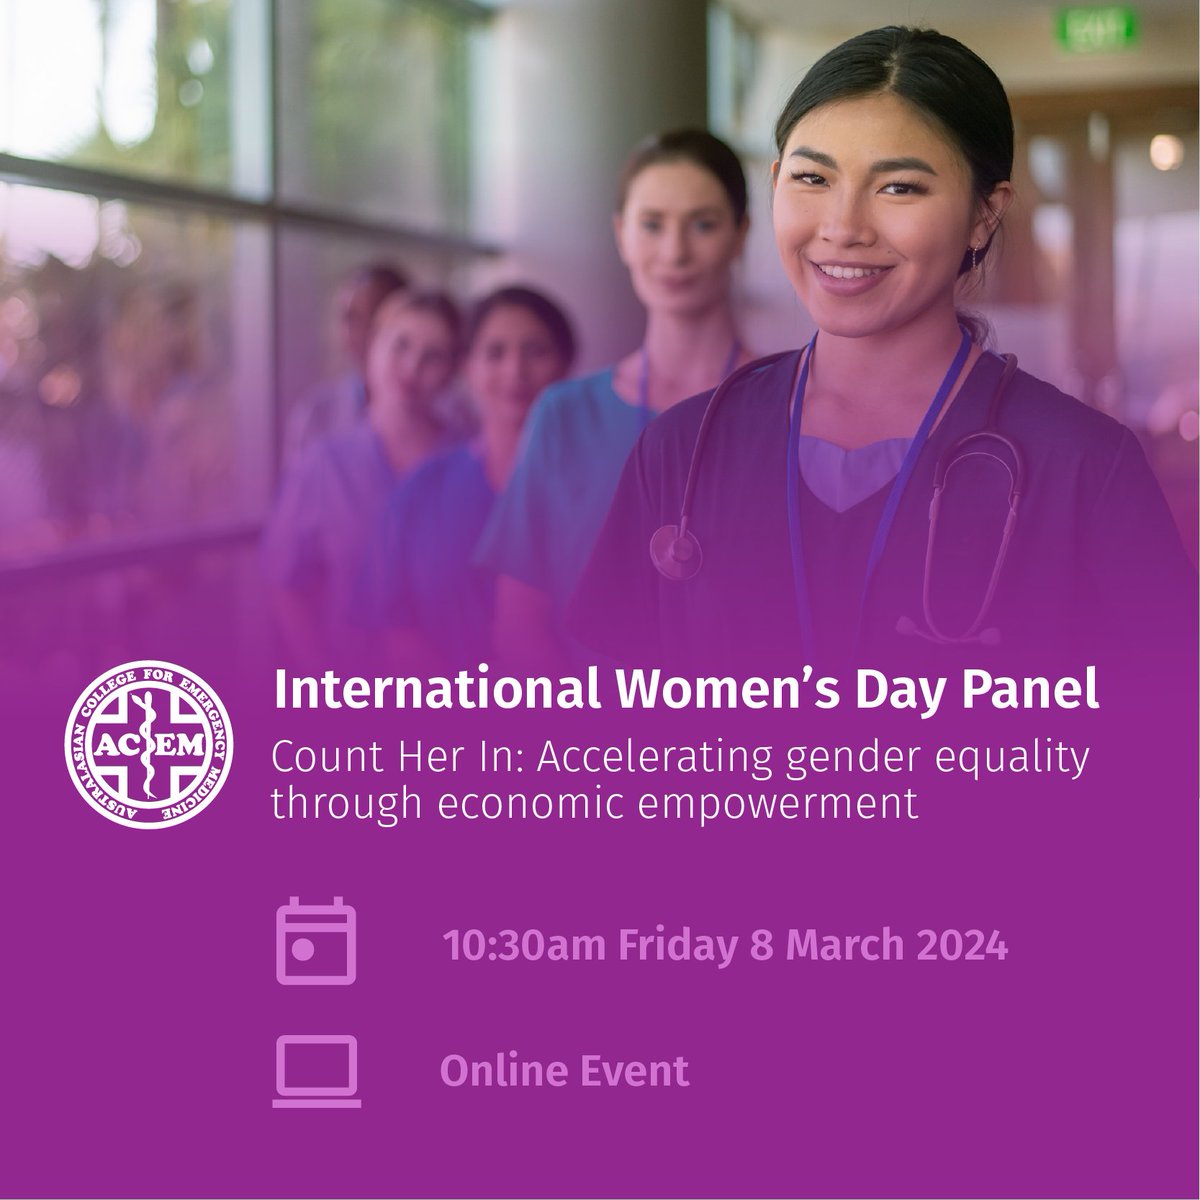 Registrations for this free International Women's Day Panel discussion are now open! Join your emergency medicine peers and explore the theme of Count Her In: Accelerating gender equality through economic empowerment. This event will create a space to discuss, reflect and